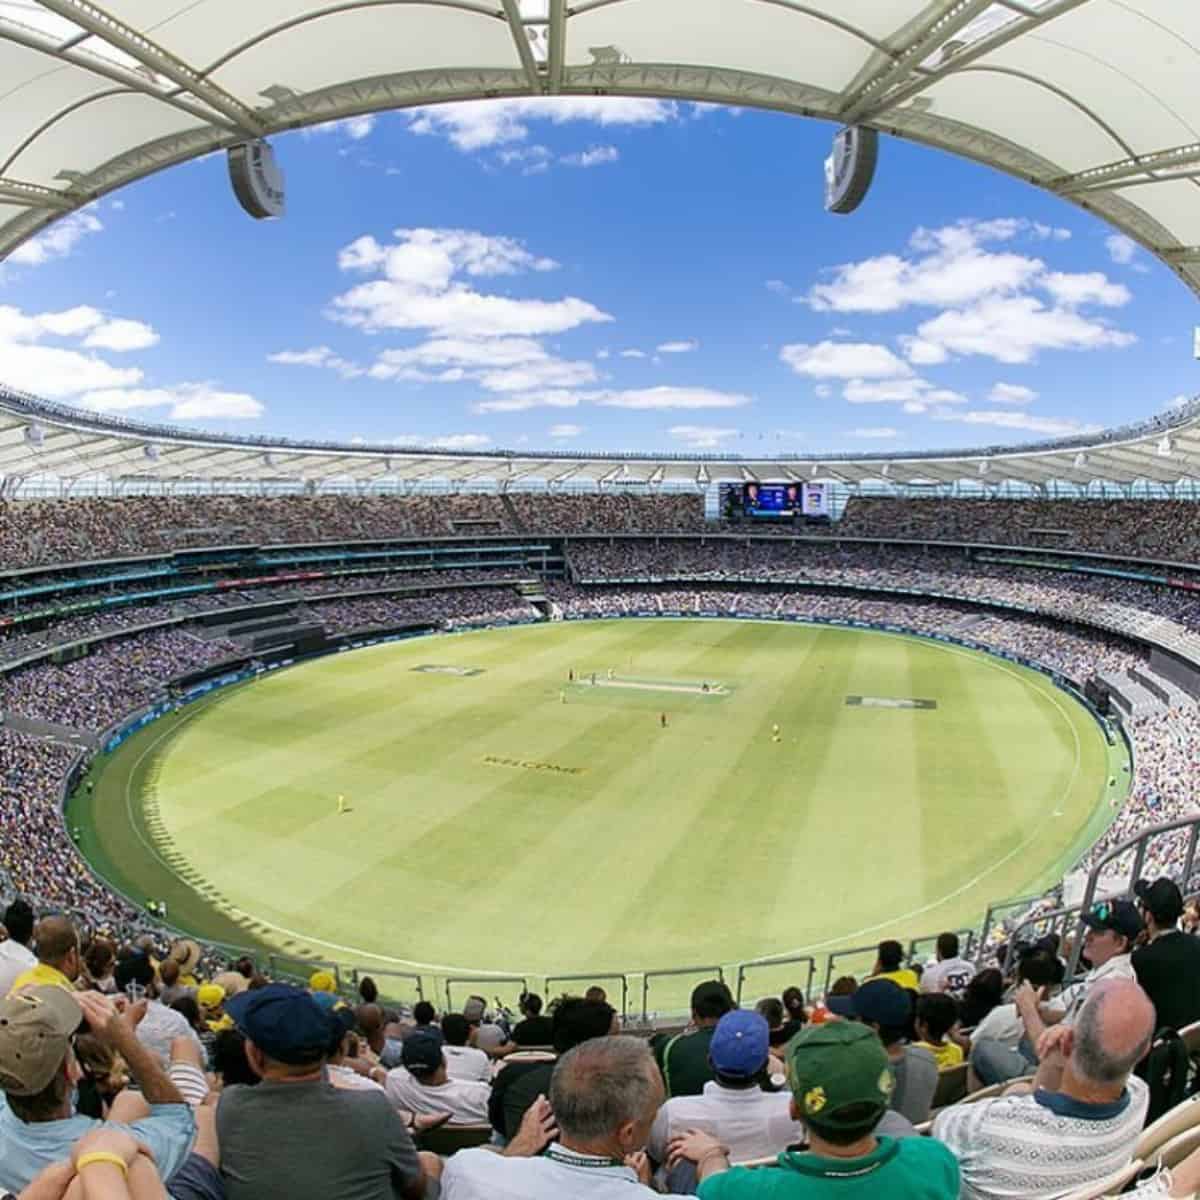  Cricket coming back in Australia, first match to be played on June 6